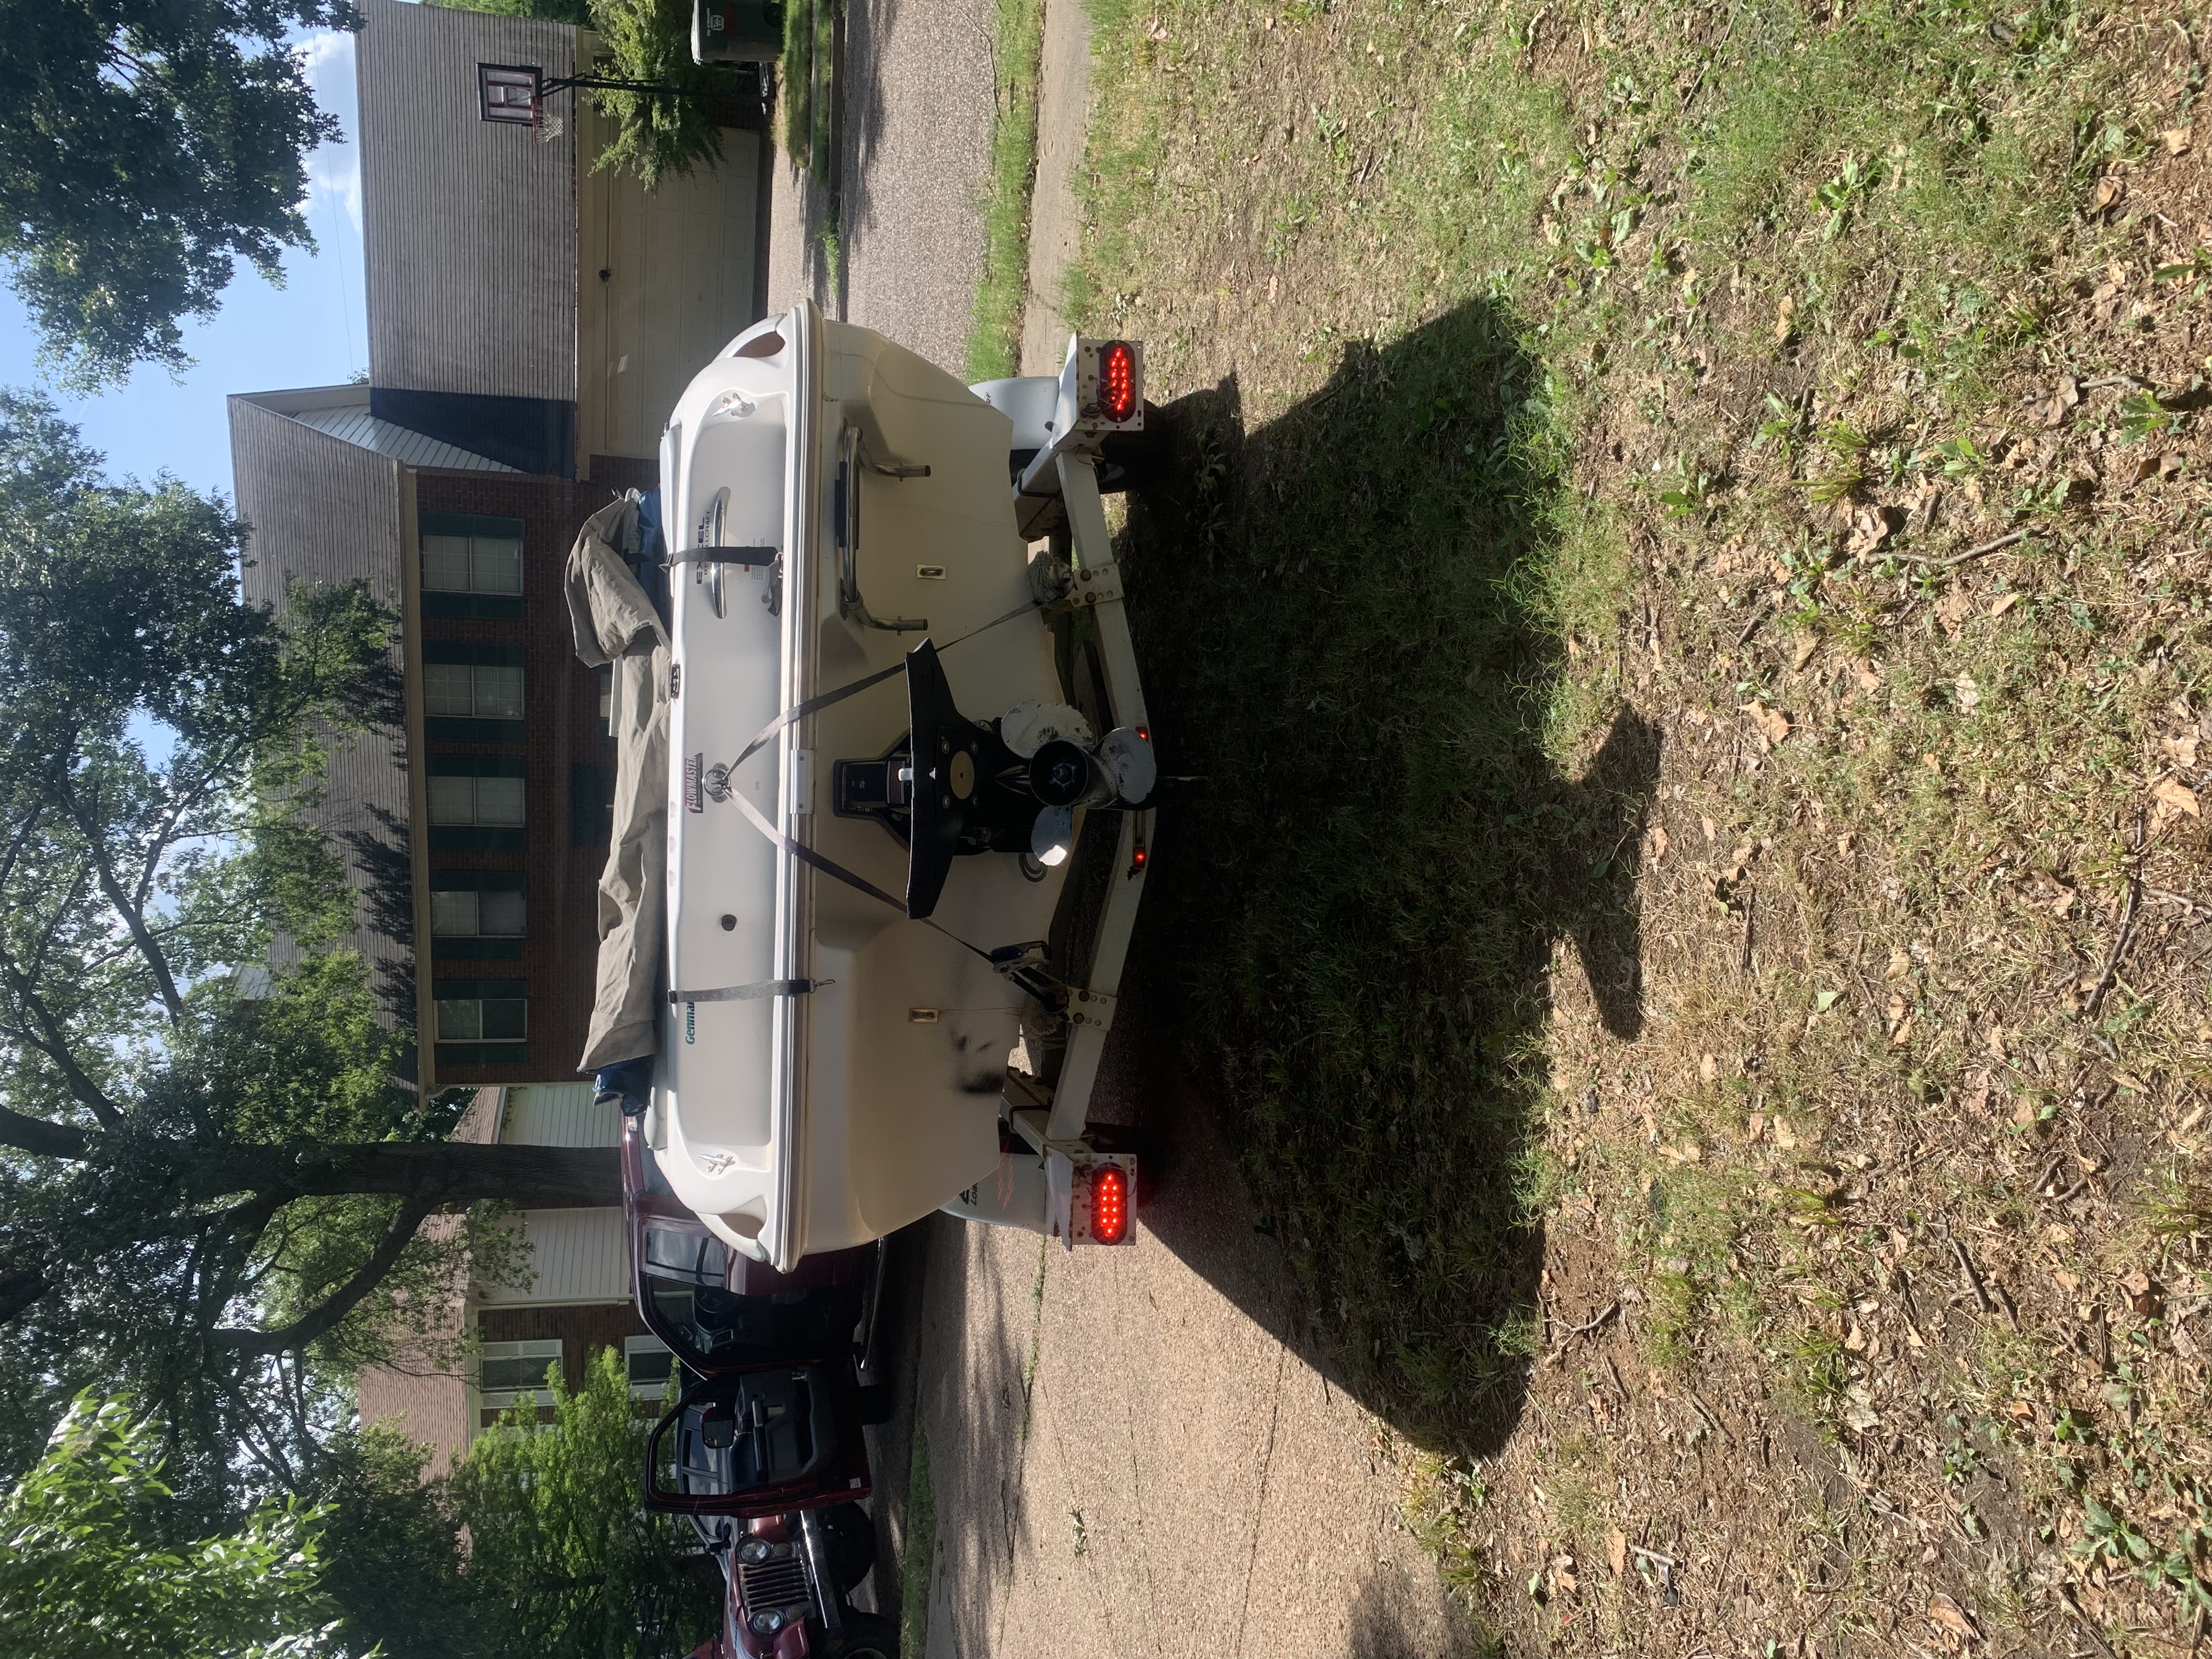 1996 Wellcraft Excel 19sx  Power boat for sale in Bartlett, TN - image 9 